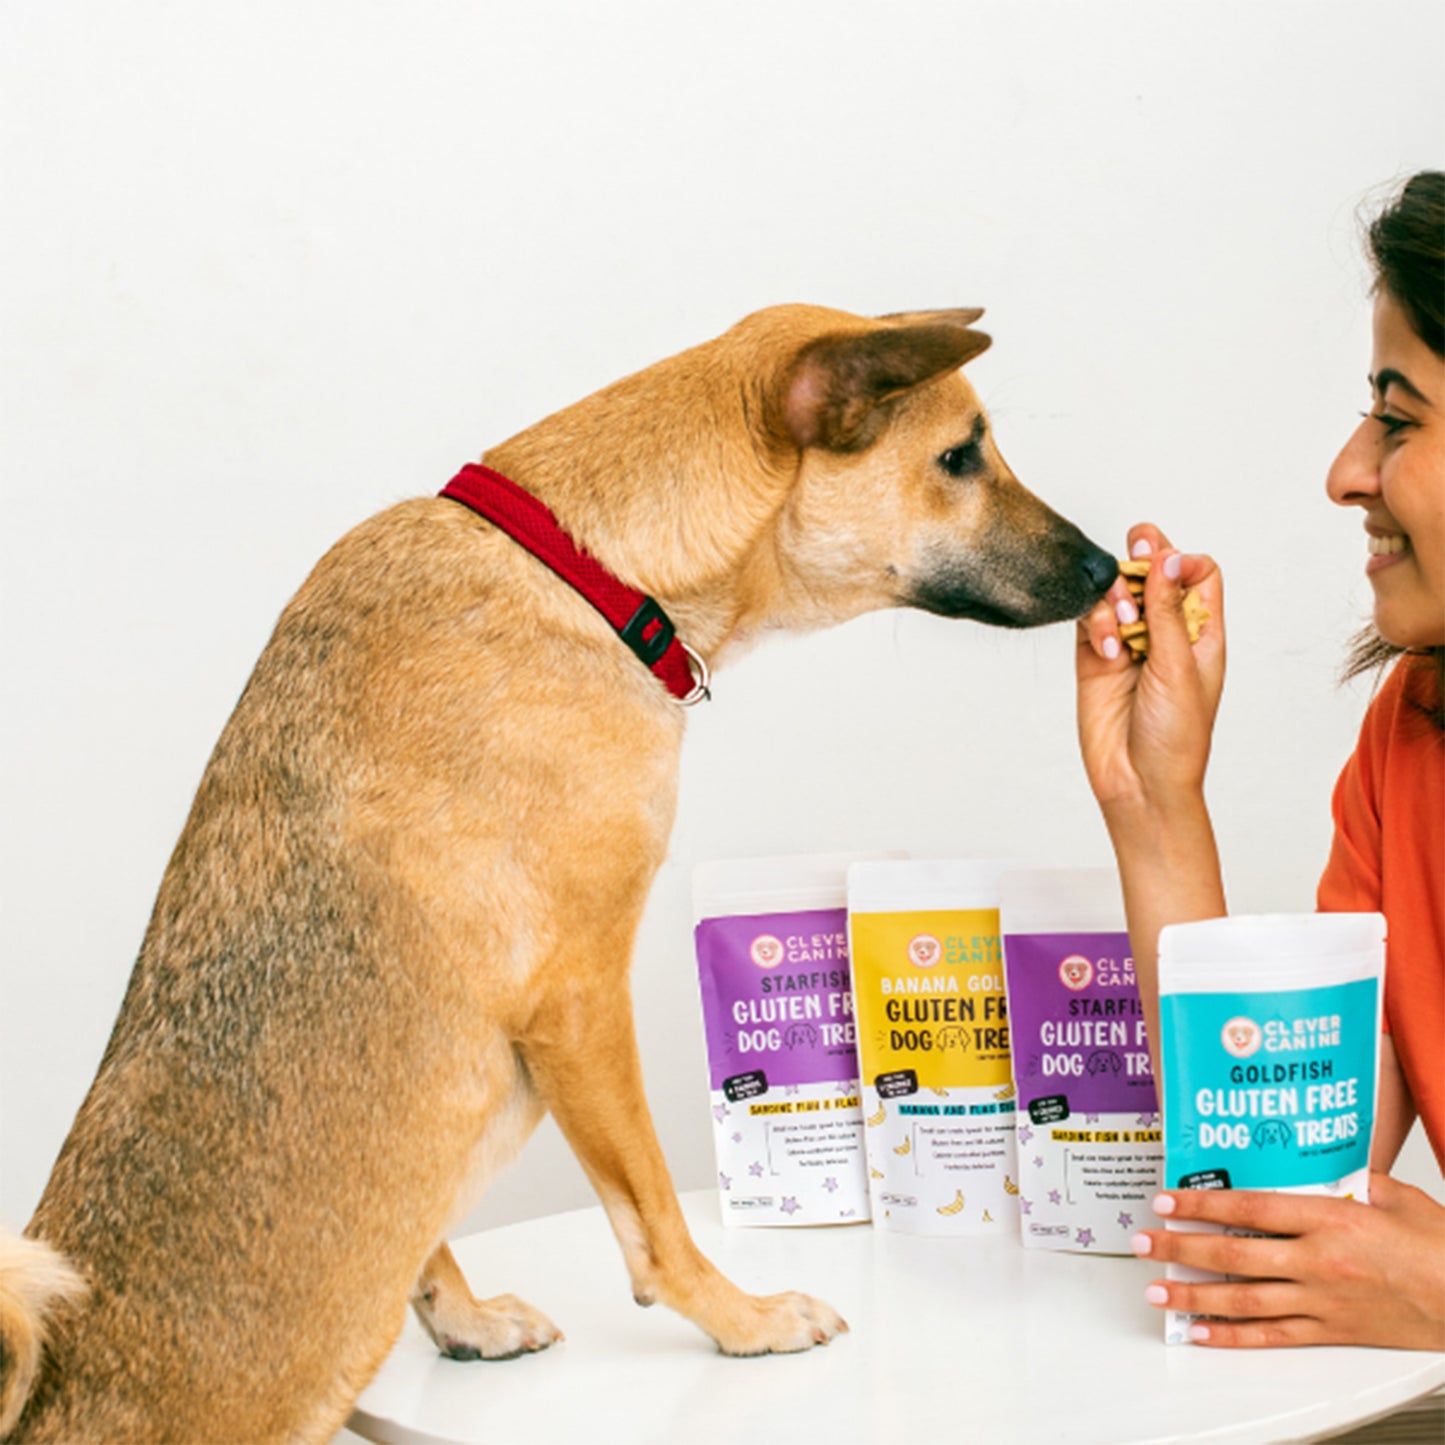 Clever Canine - Gluten Free Dogs Treats Banana Goldies